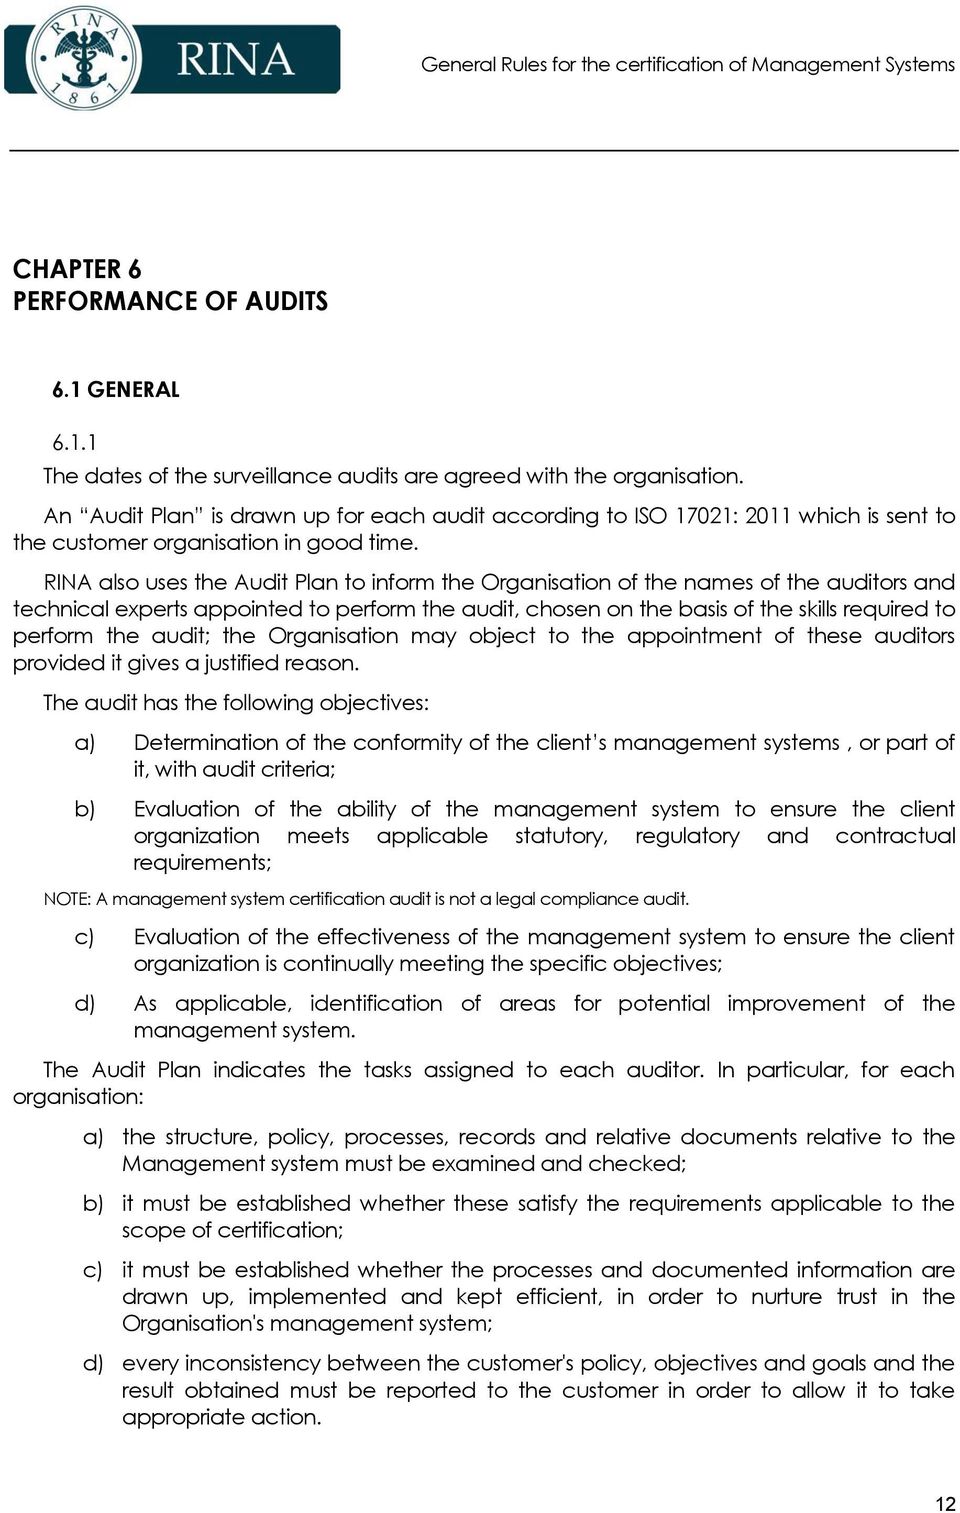 RINA also uses the Audit Plan to inform the Organisation of the names of the auditors and technical experts appointed to perform the audit, chosen on the basis of the skills required to perform the